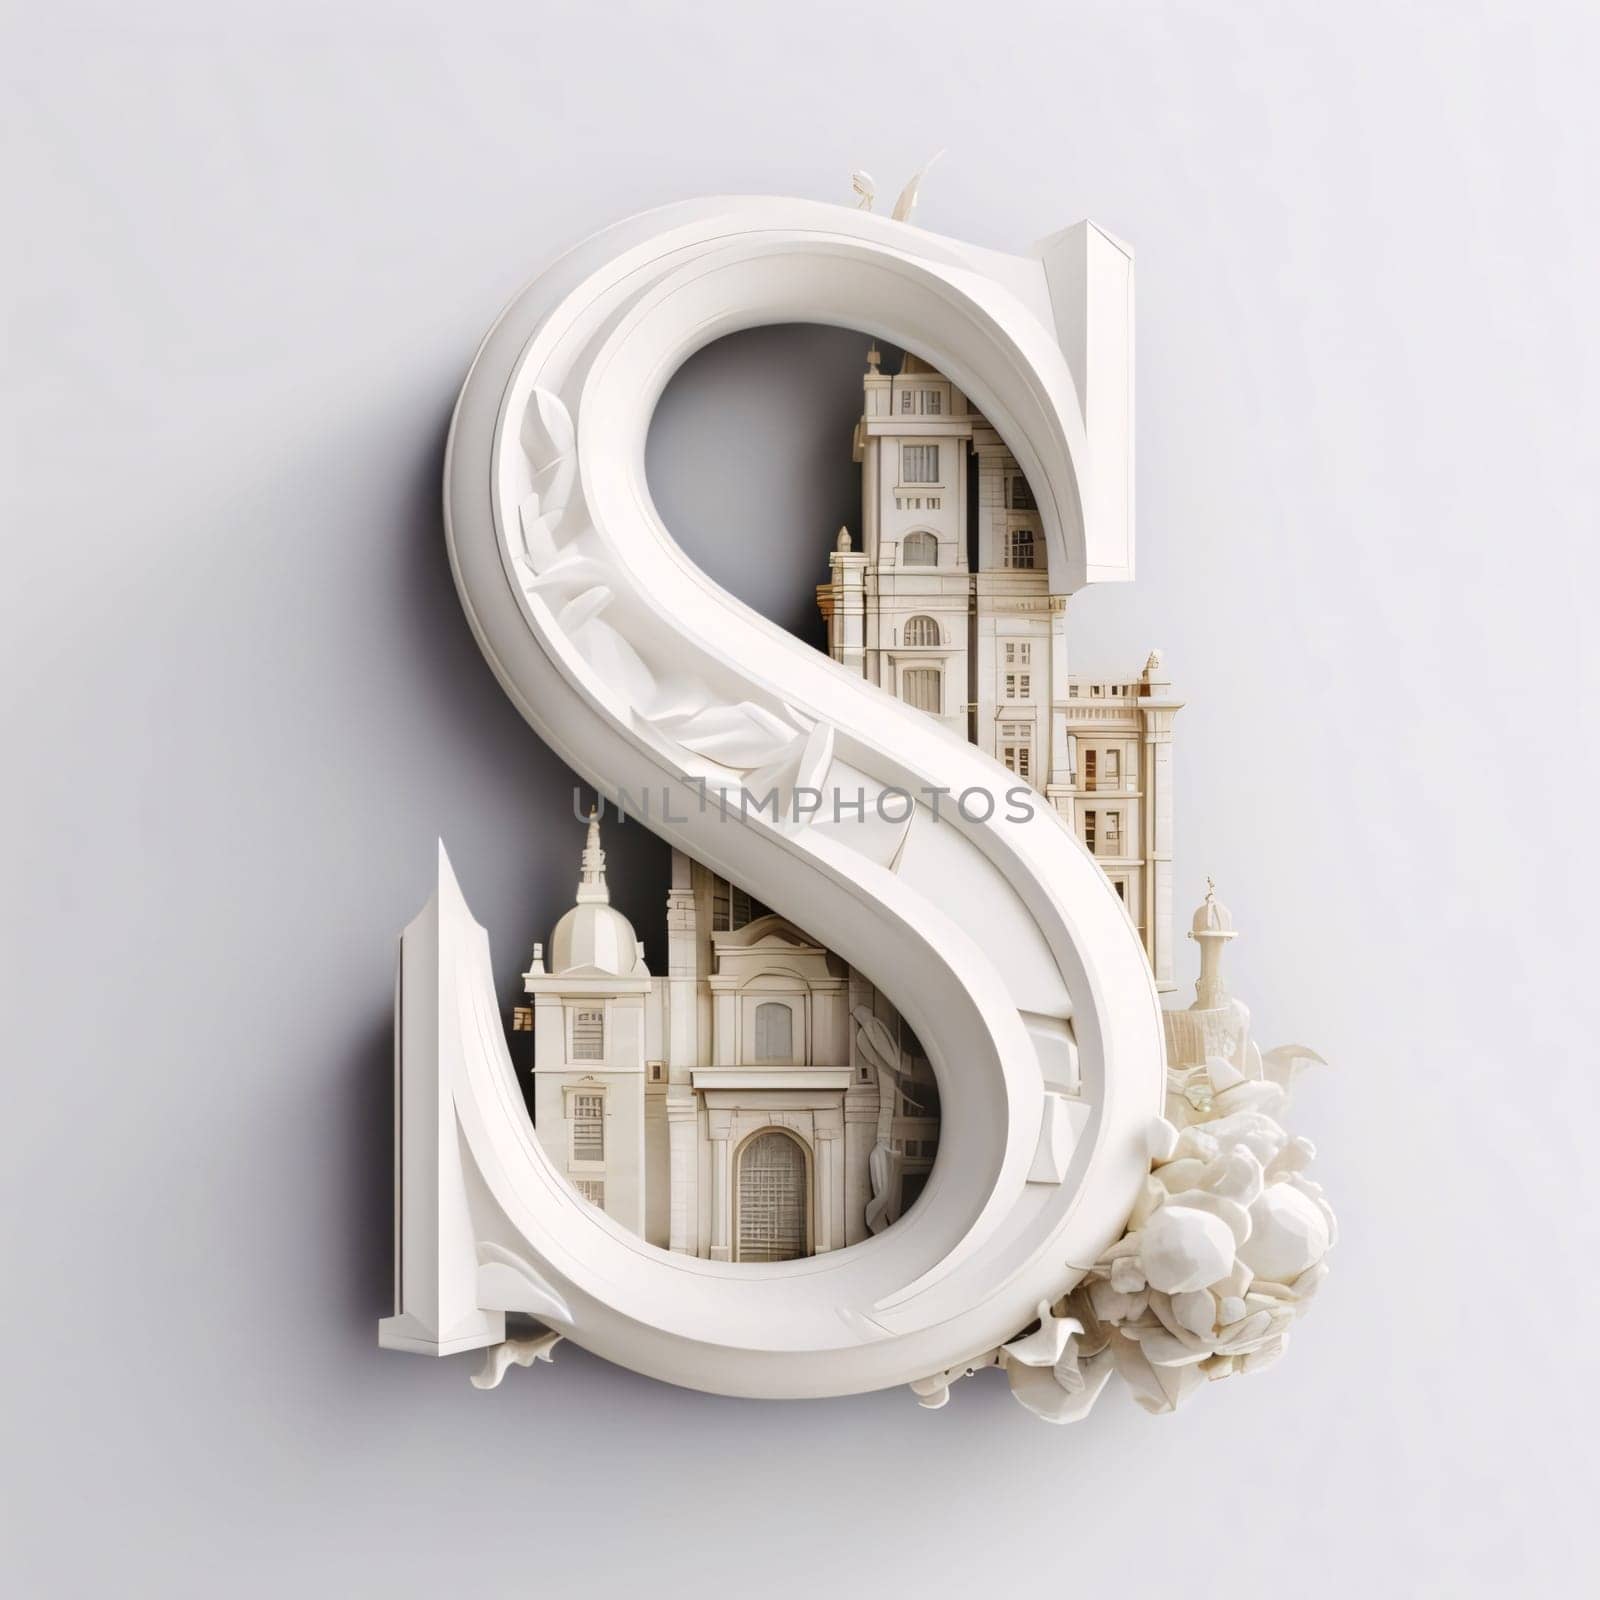 Letter S made of white stone with decorative elements. 3d rendering by ThemesS